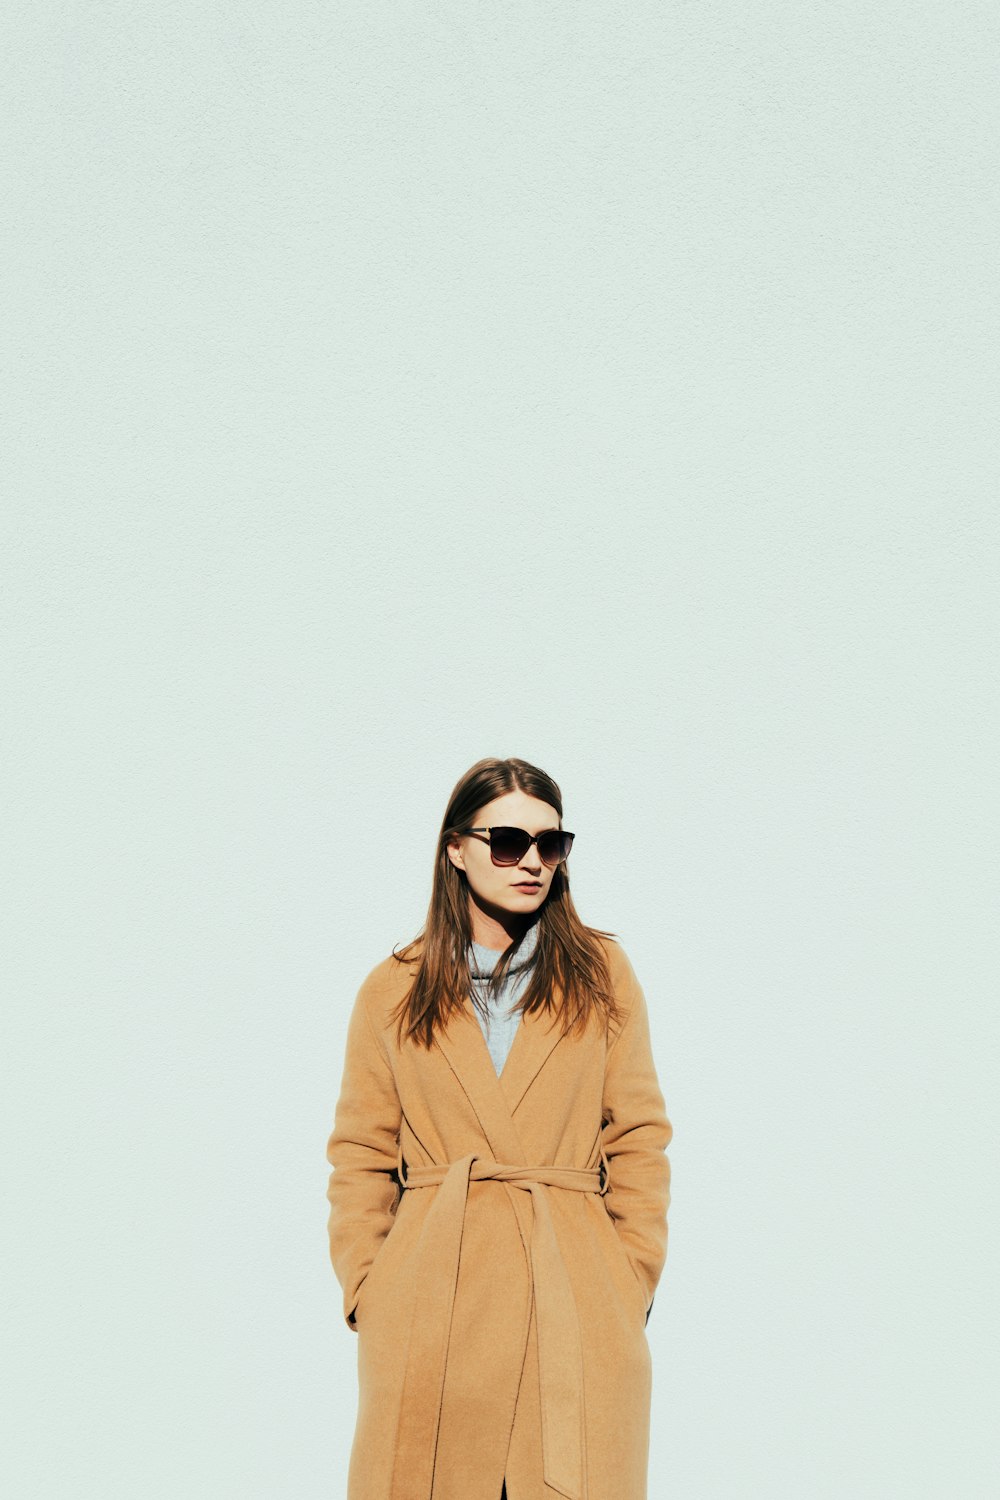 a woman in a tan coat and sunglasses